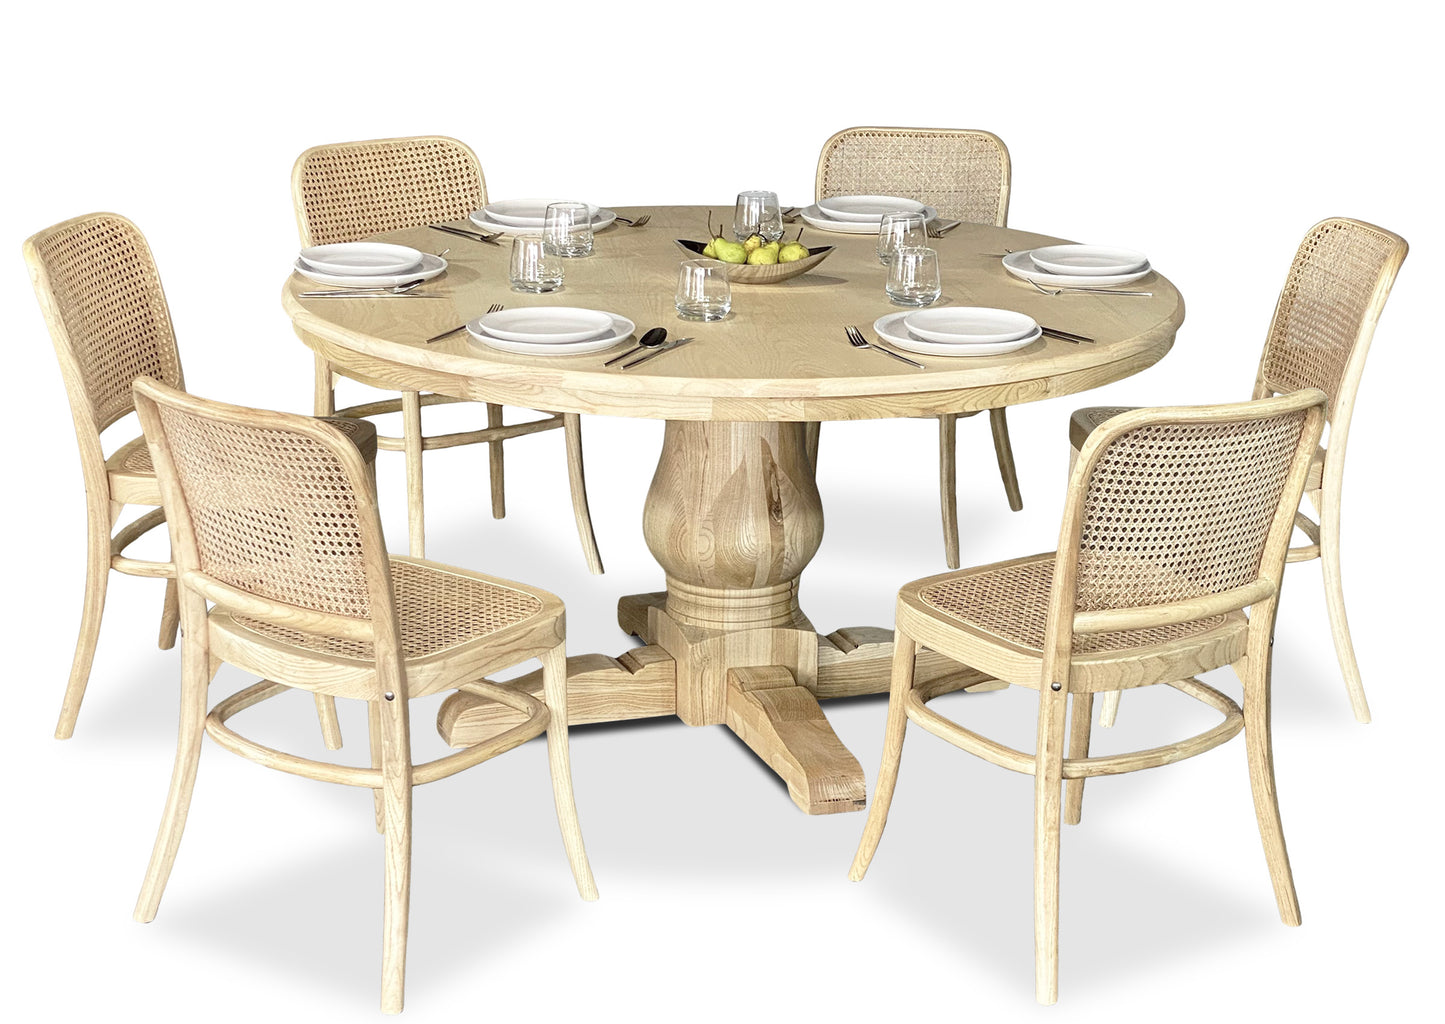 Parisienne Dining Table - Blonde (1500mm)